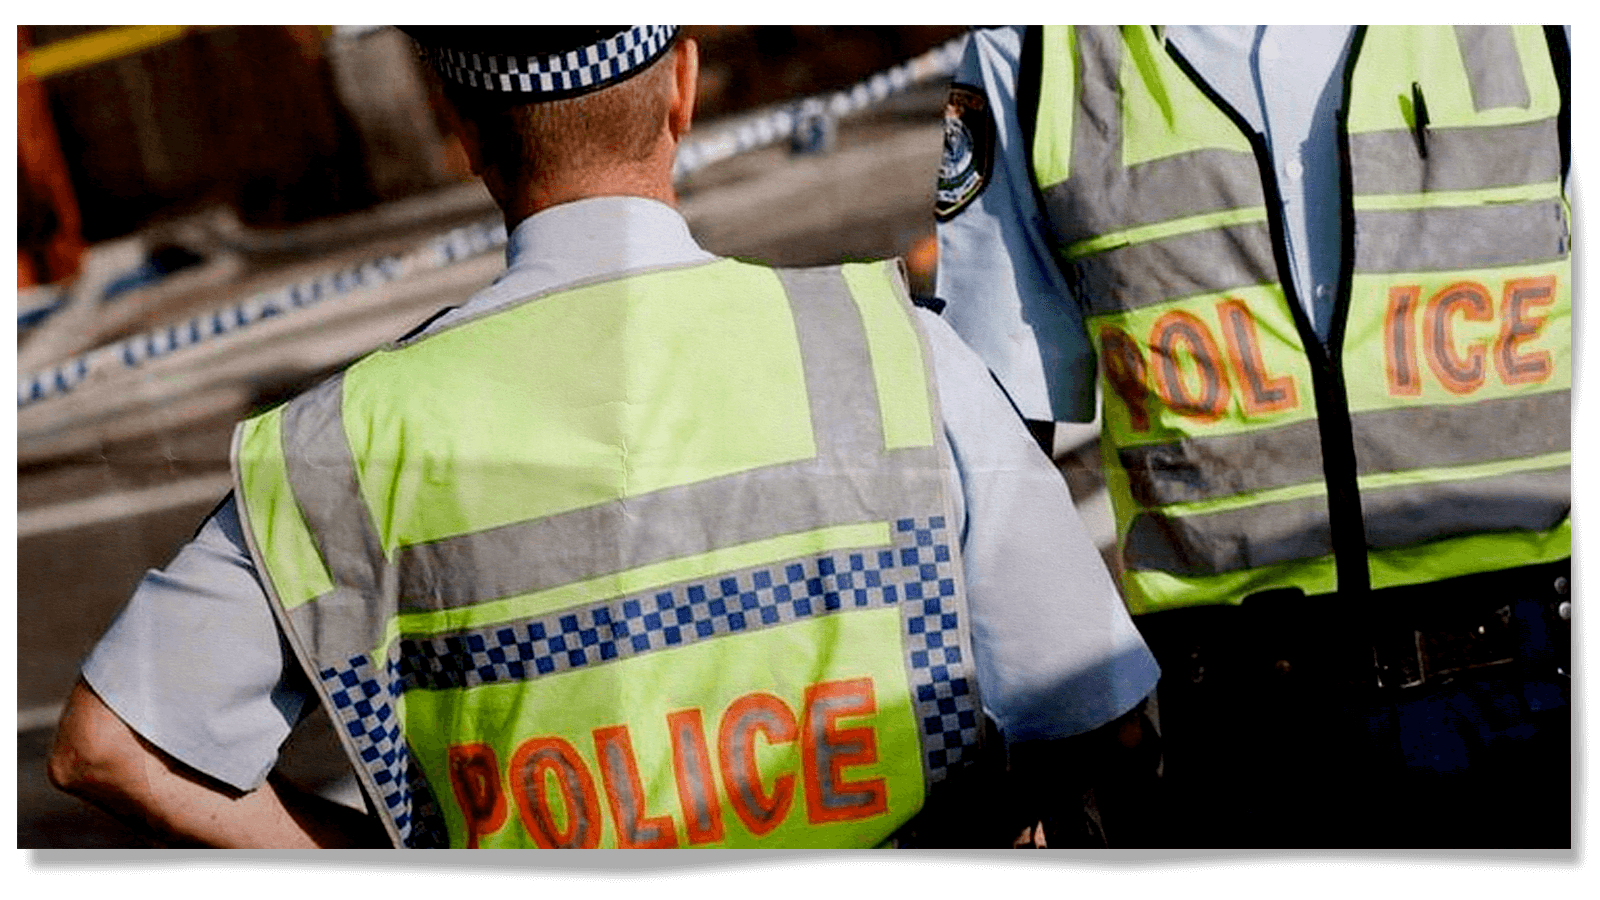 Two police officers wearing high-vis vests